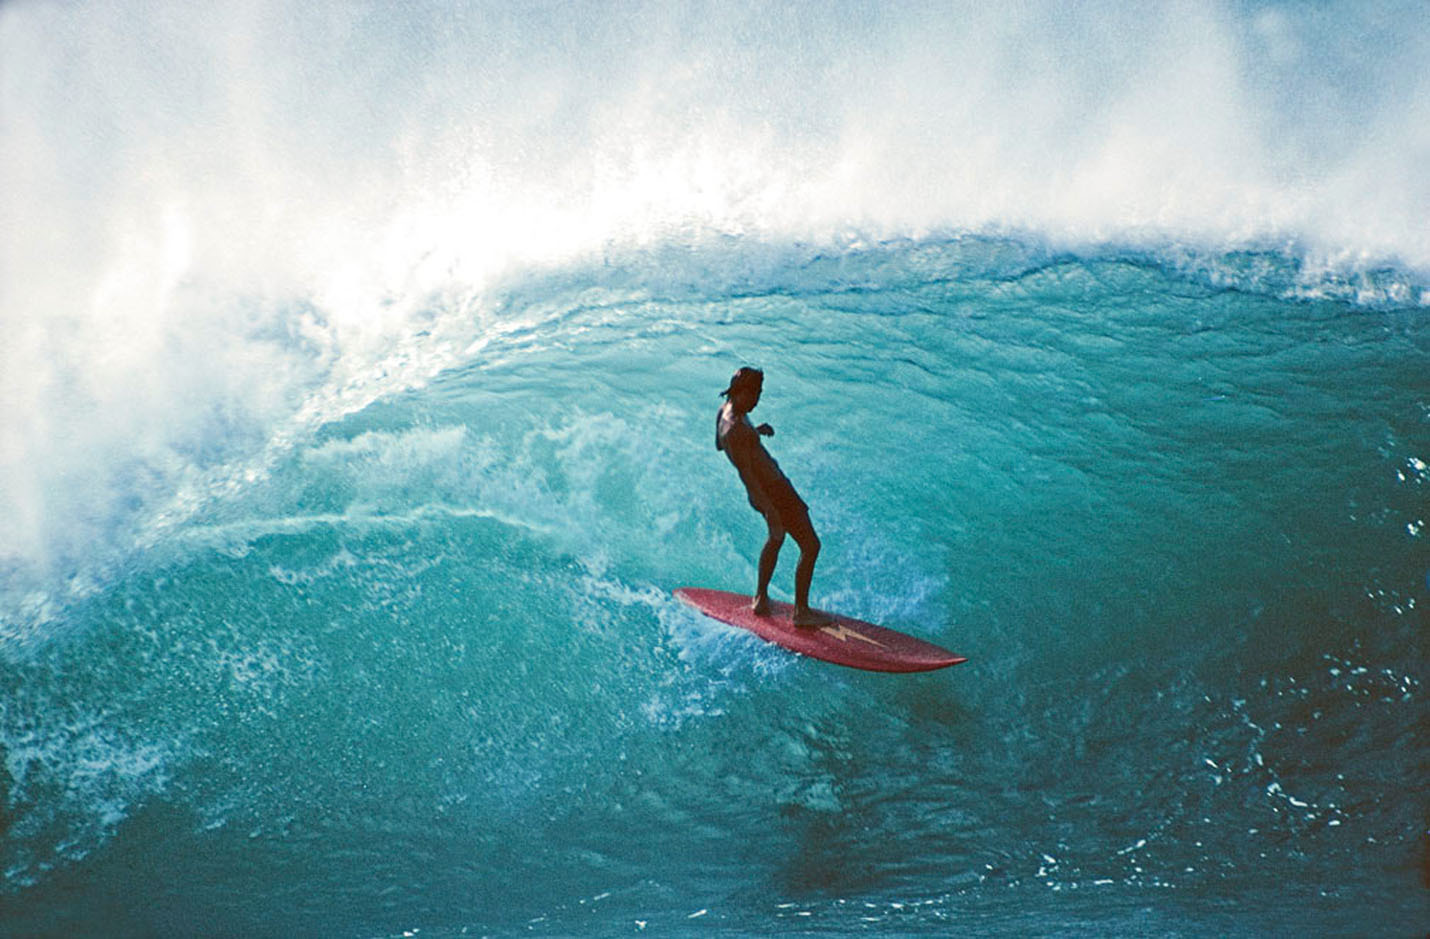 Gerry Lopez at Pipeline, Hawaii in the '70s